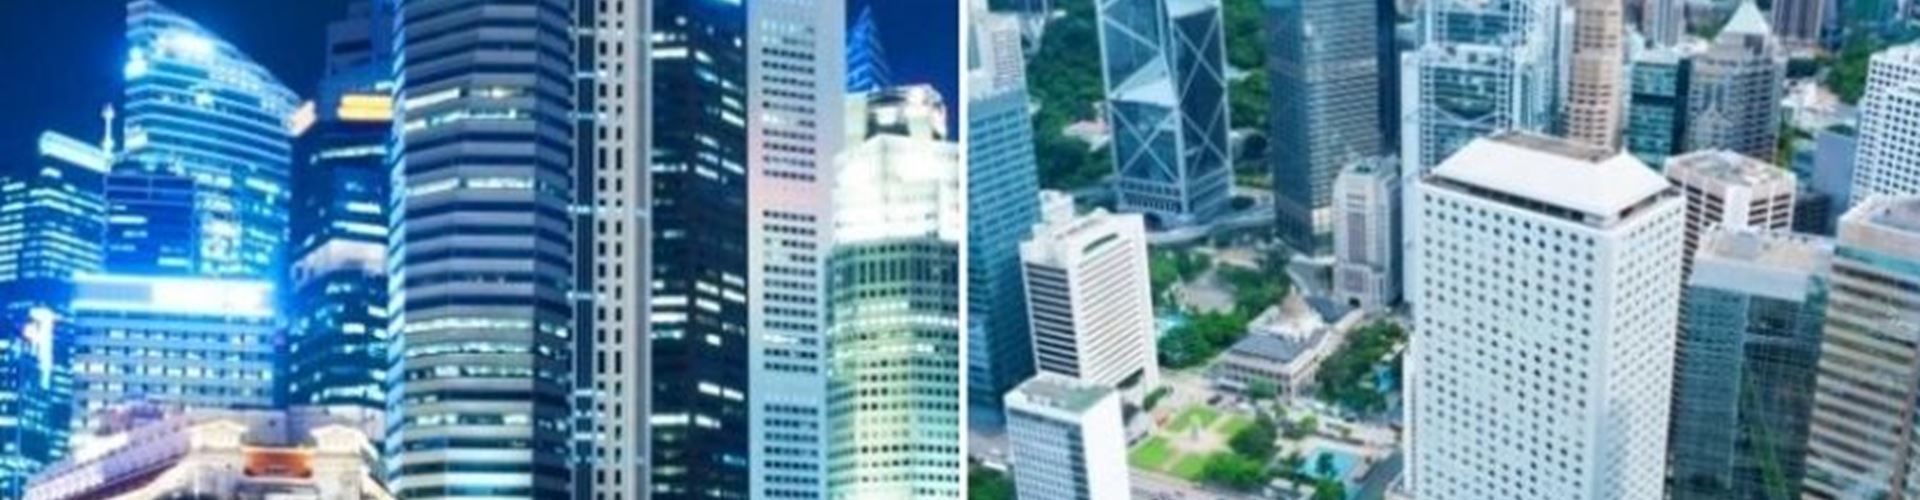 Singapore and Hong Kong compete to be Asia’s top financial market